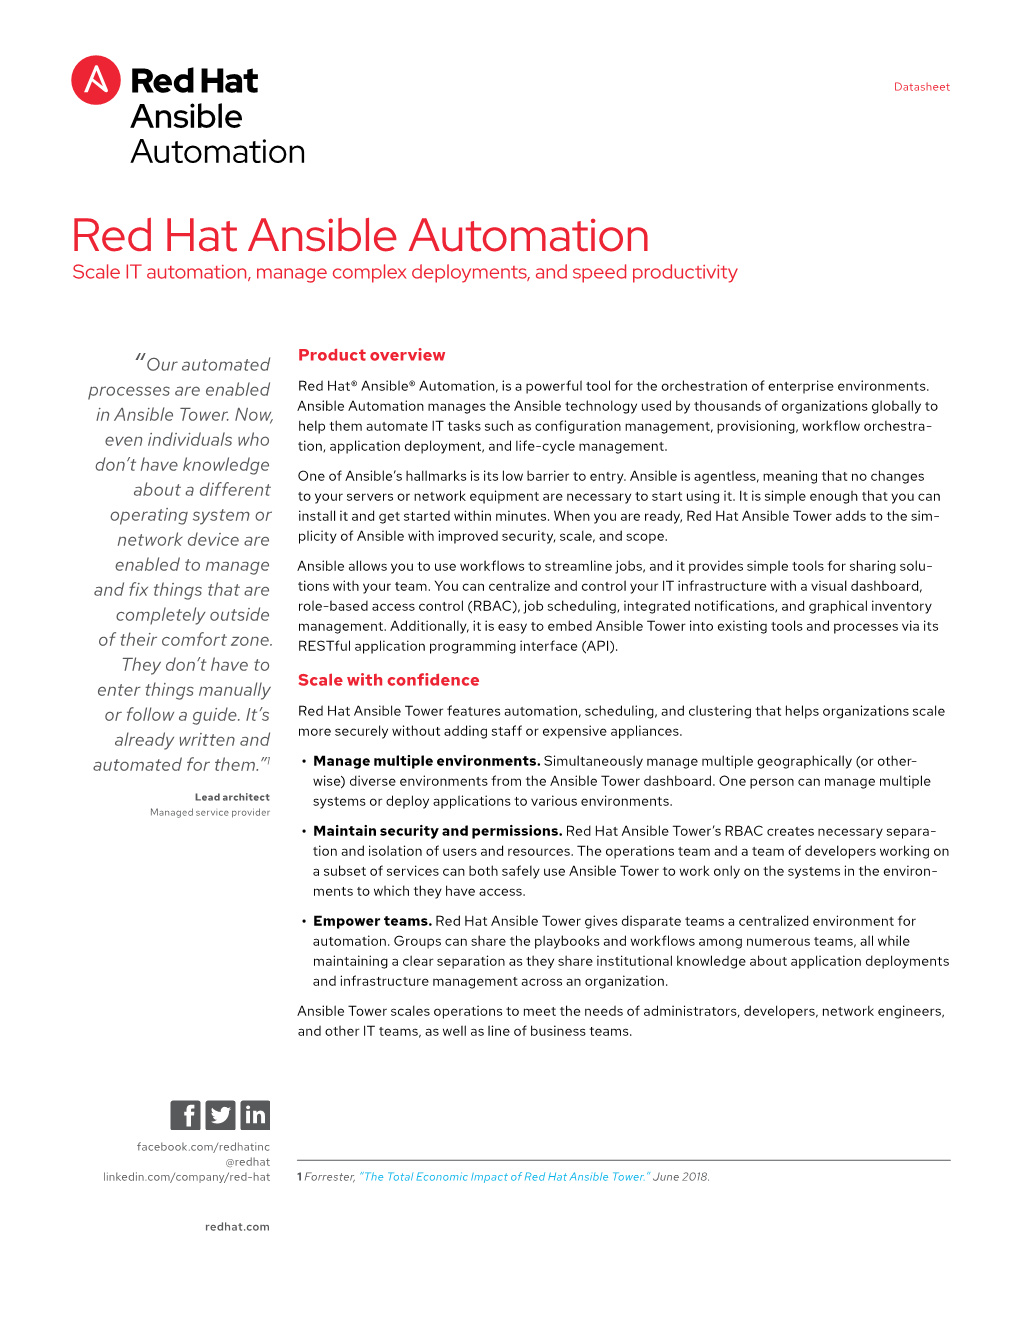 Red Hat Ansible Automation Scale IT Automation, Manage Complex Deployments, and Speed Productivity